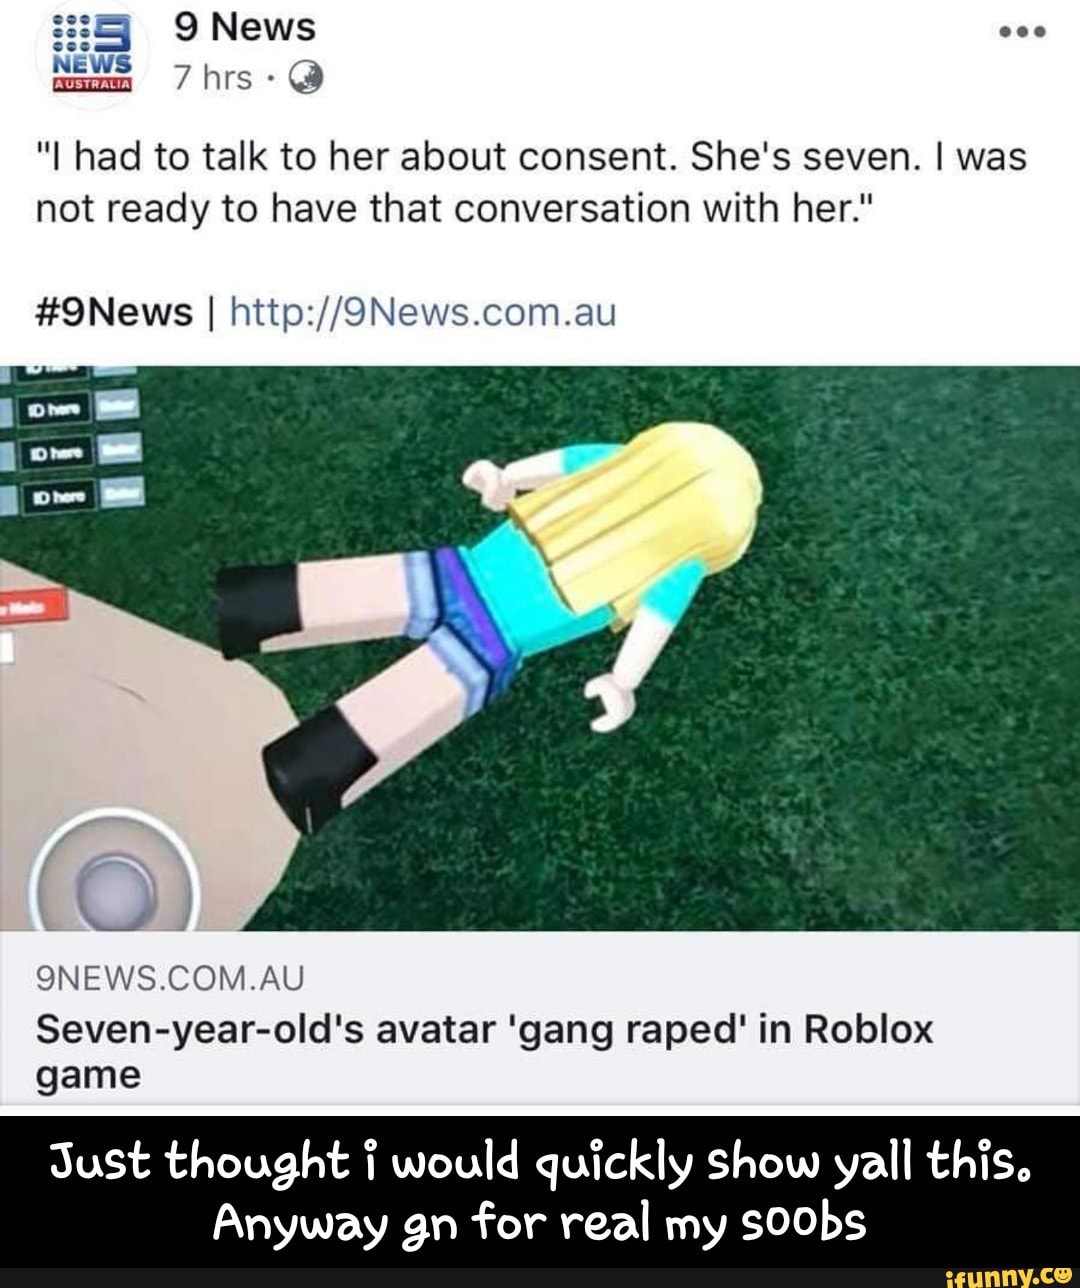 I Had To Talk To Her About Consent She S Seven I Was Not Ready To Have That Conversation With Her 9news I Http 9news Com Au Just Thought I Would Quickly Show Yall This Anyway - soobs roblox